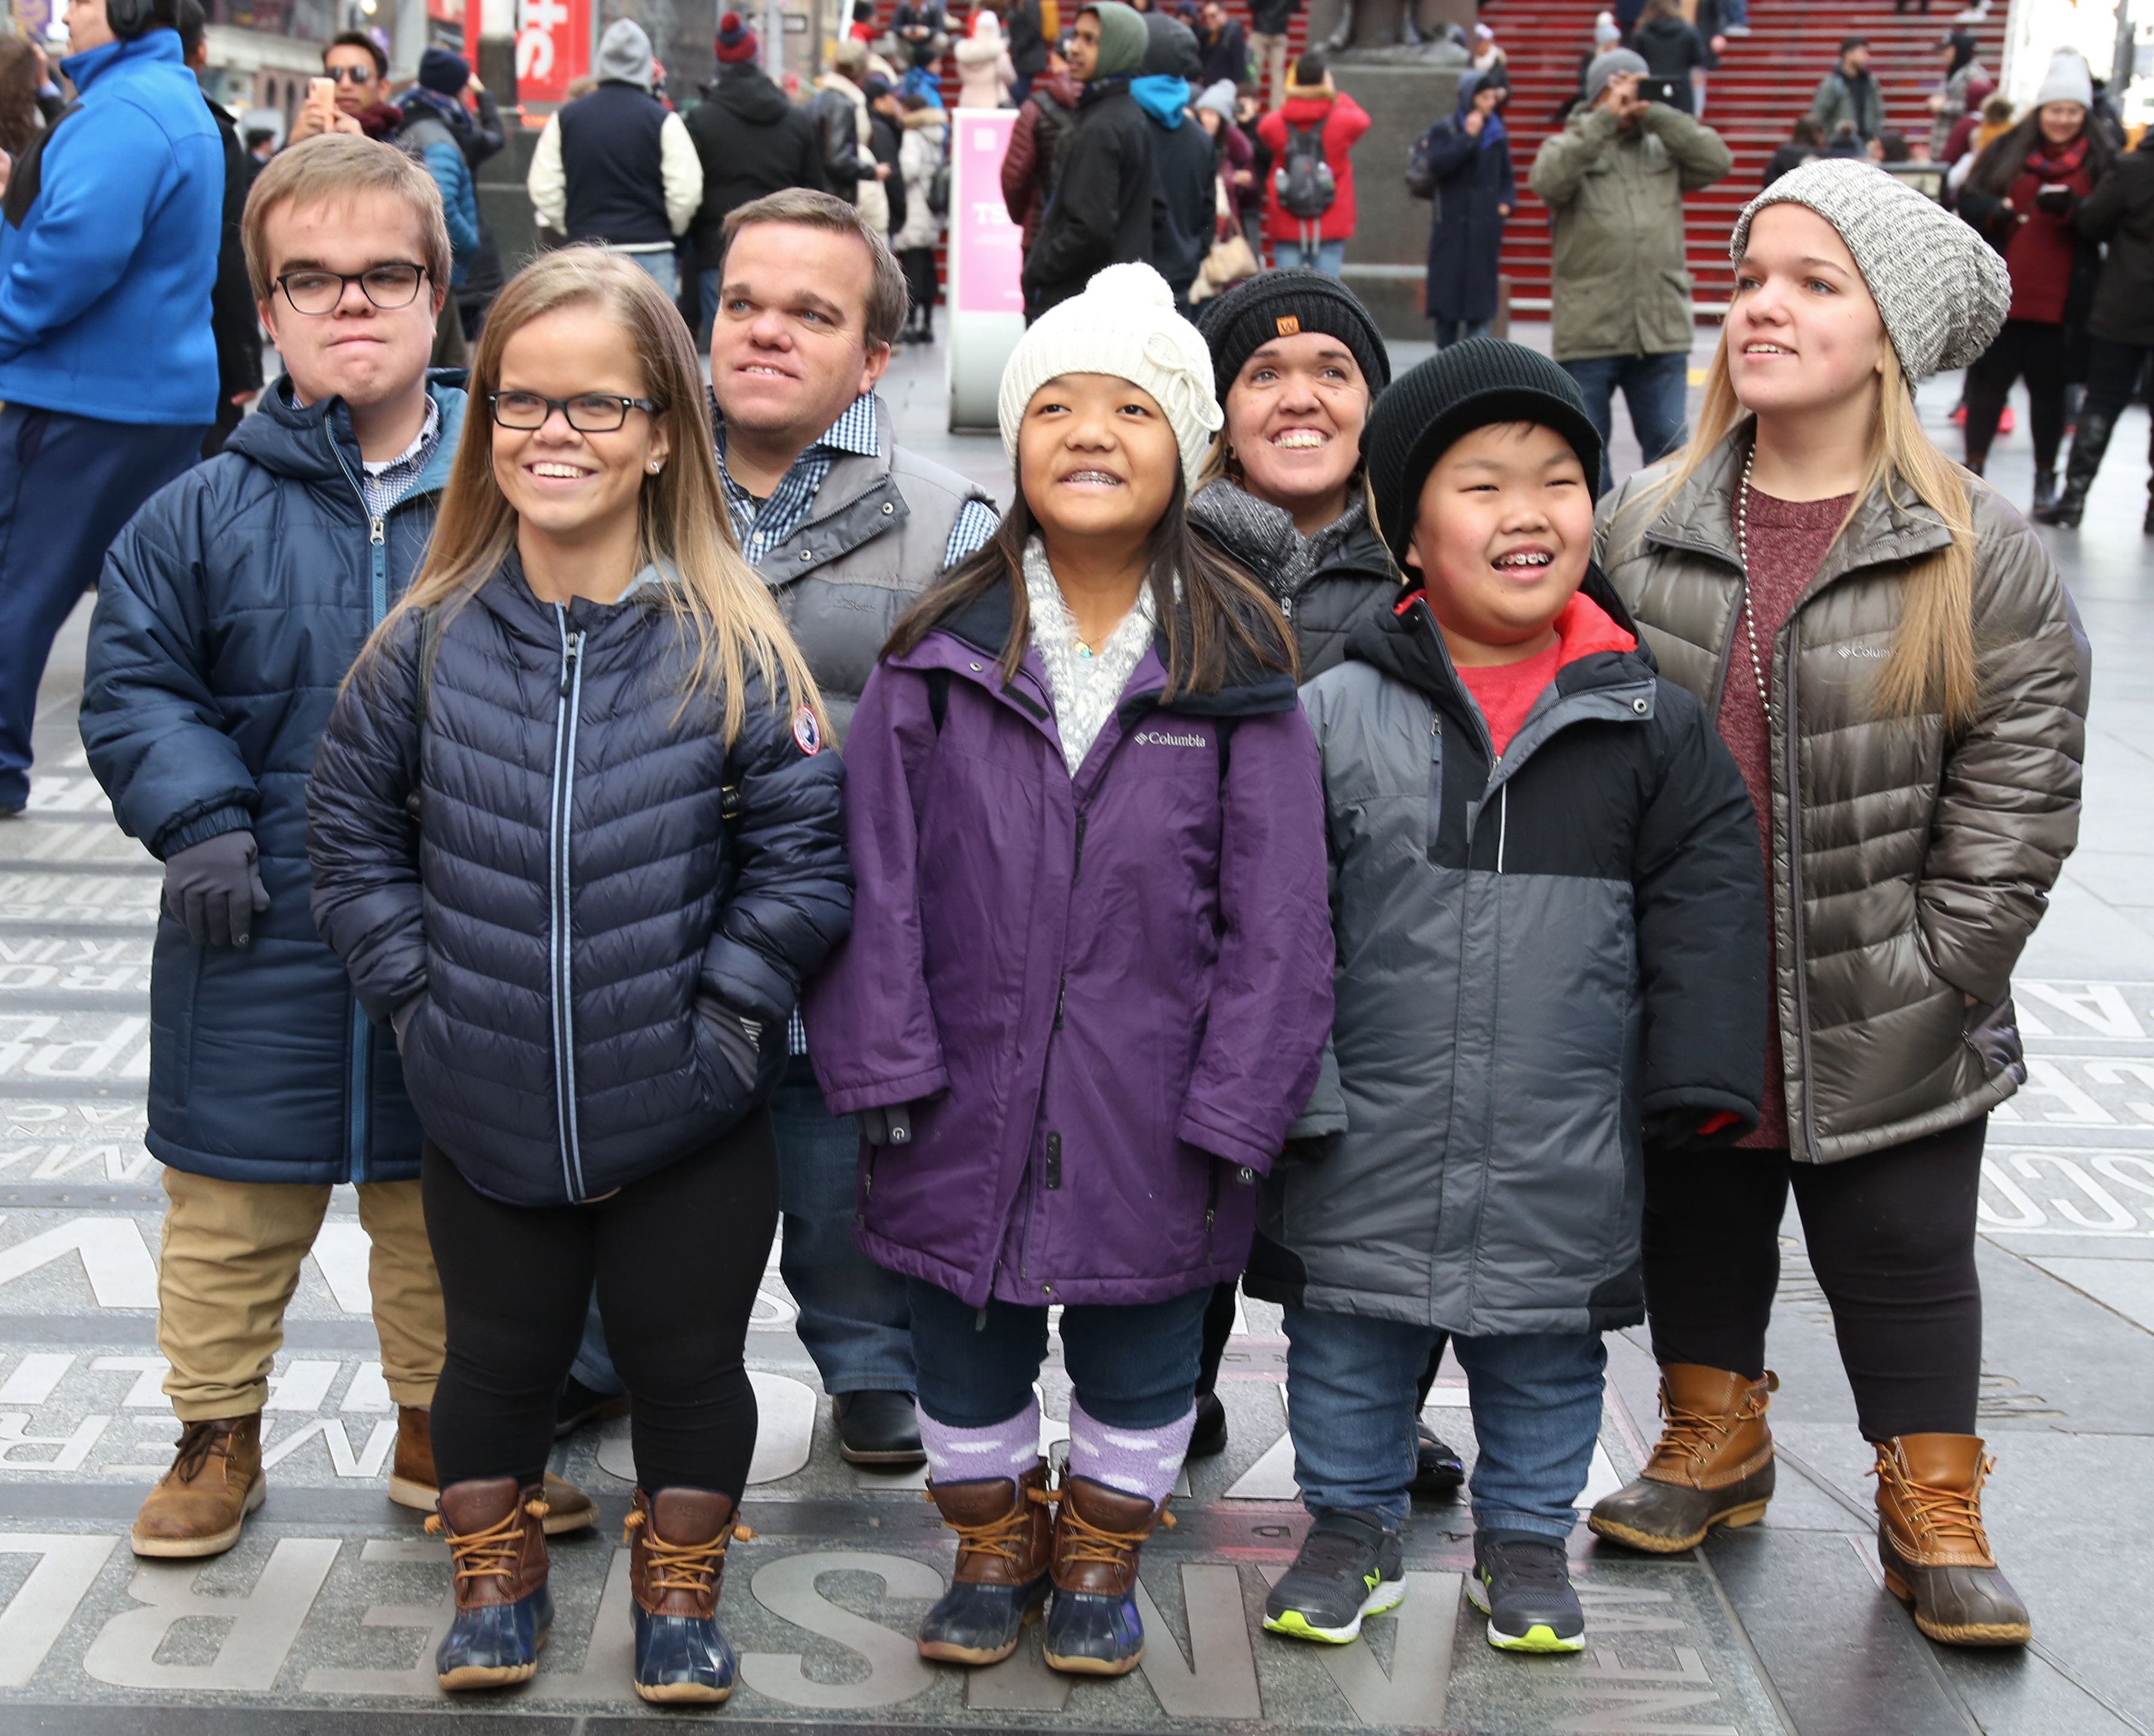 The cast of TLC's "7 Little Johnstons" filming a visit to Times Square on January 4, 2019 | Photo: Getty Images